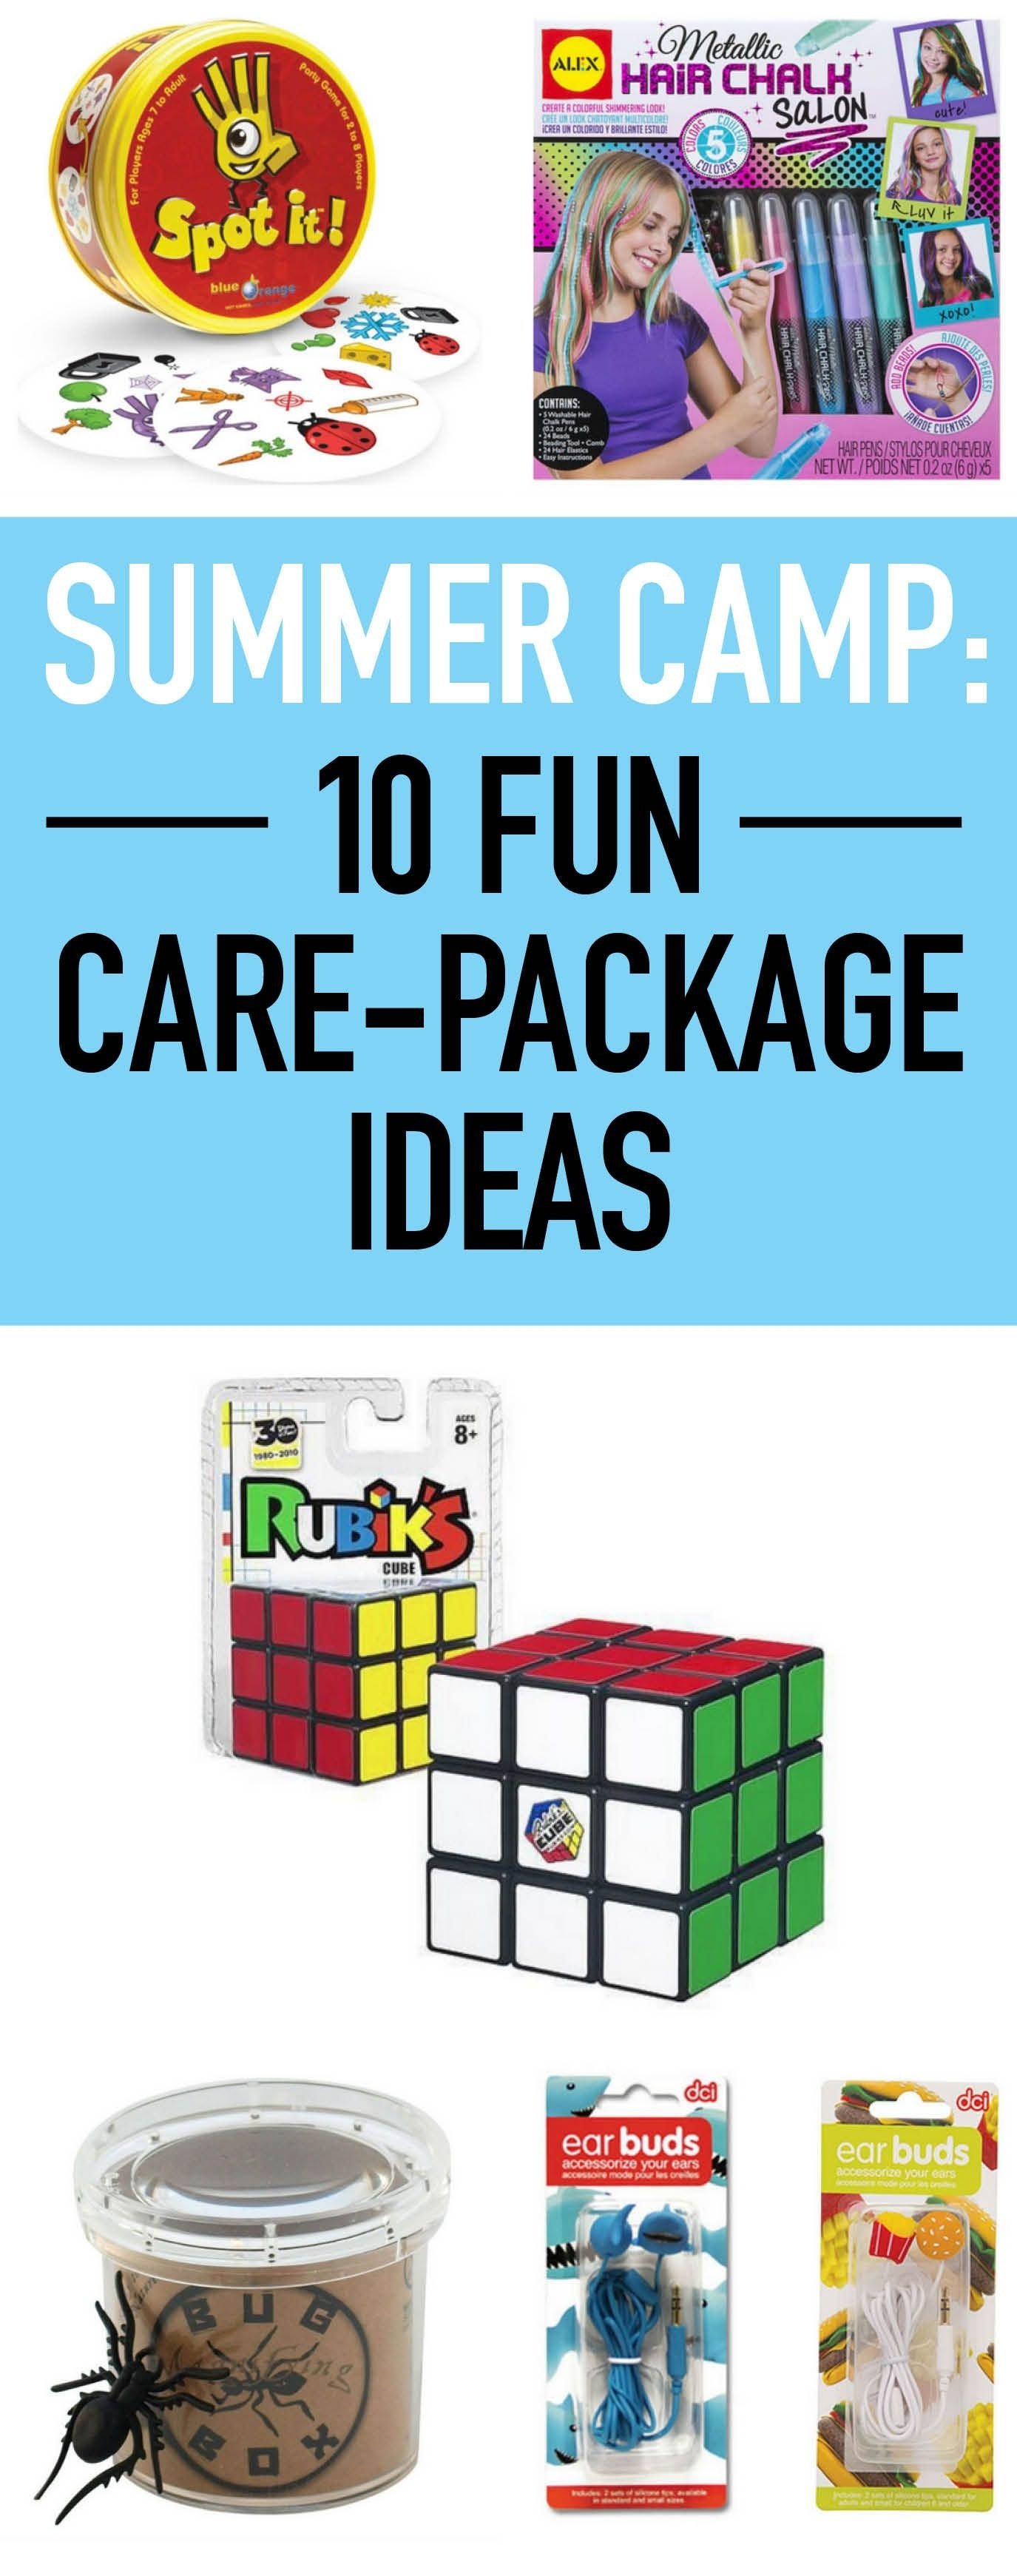 10 Lovely Summer Camp Care Package Ideas summer camp 19 fun care package ideas camp care packages camping 2022